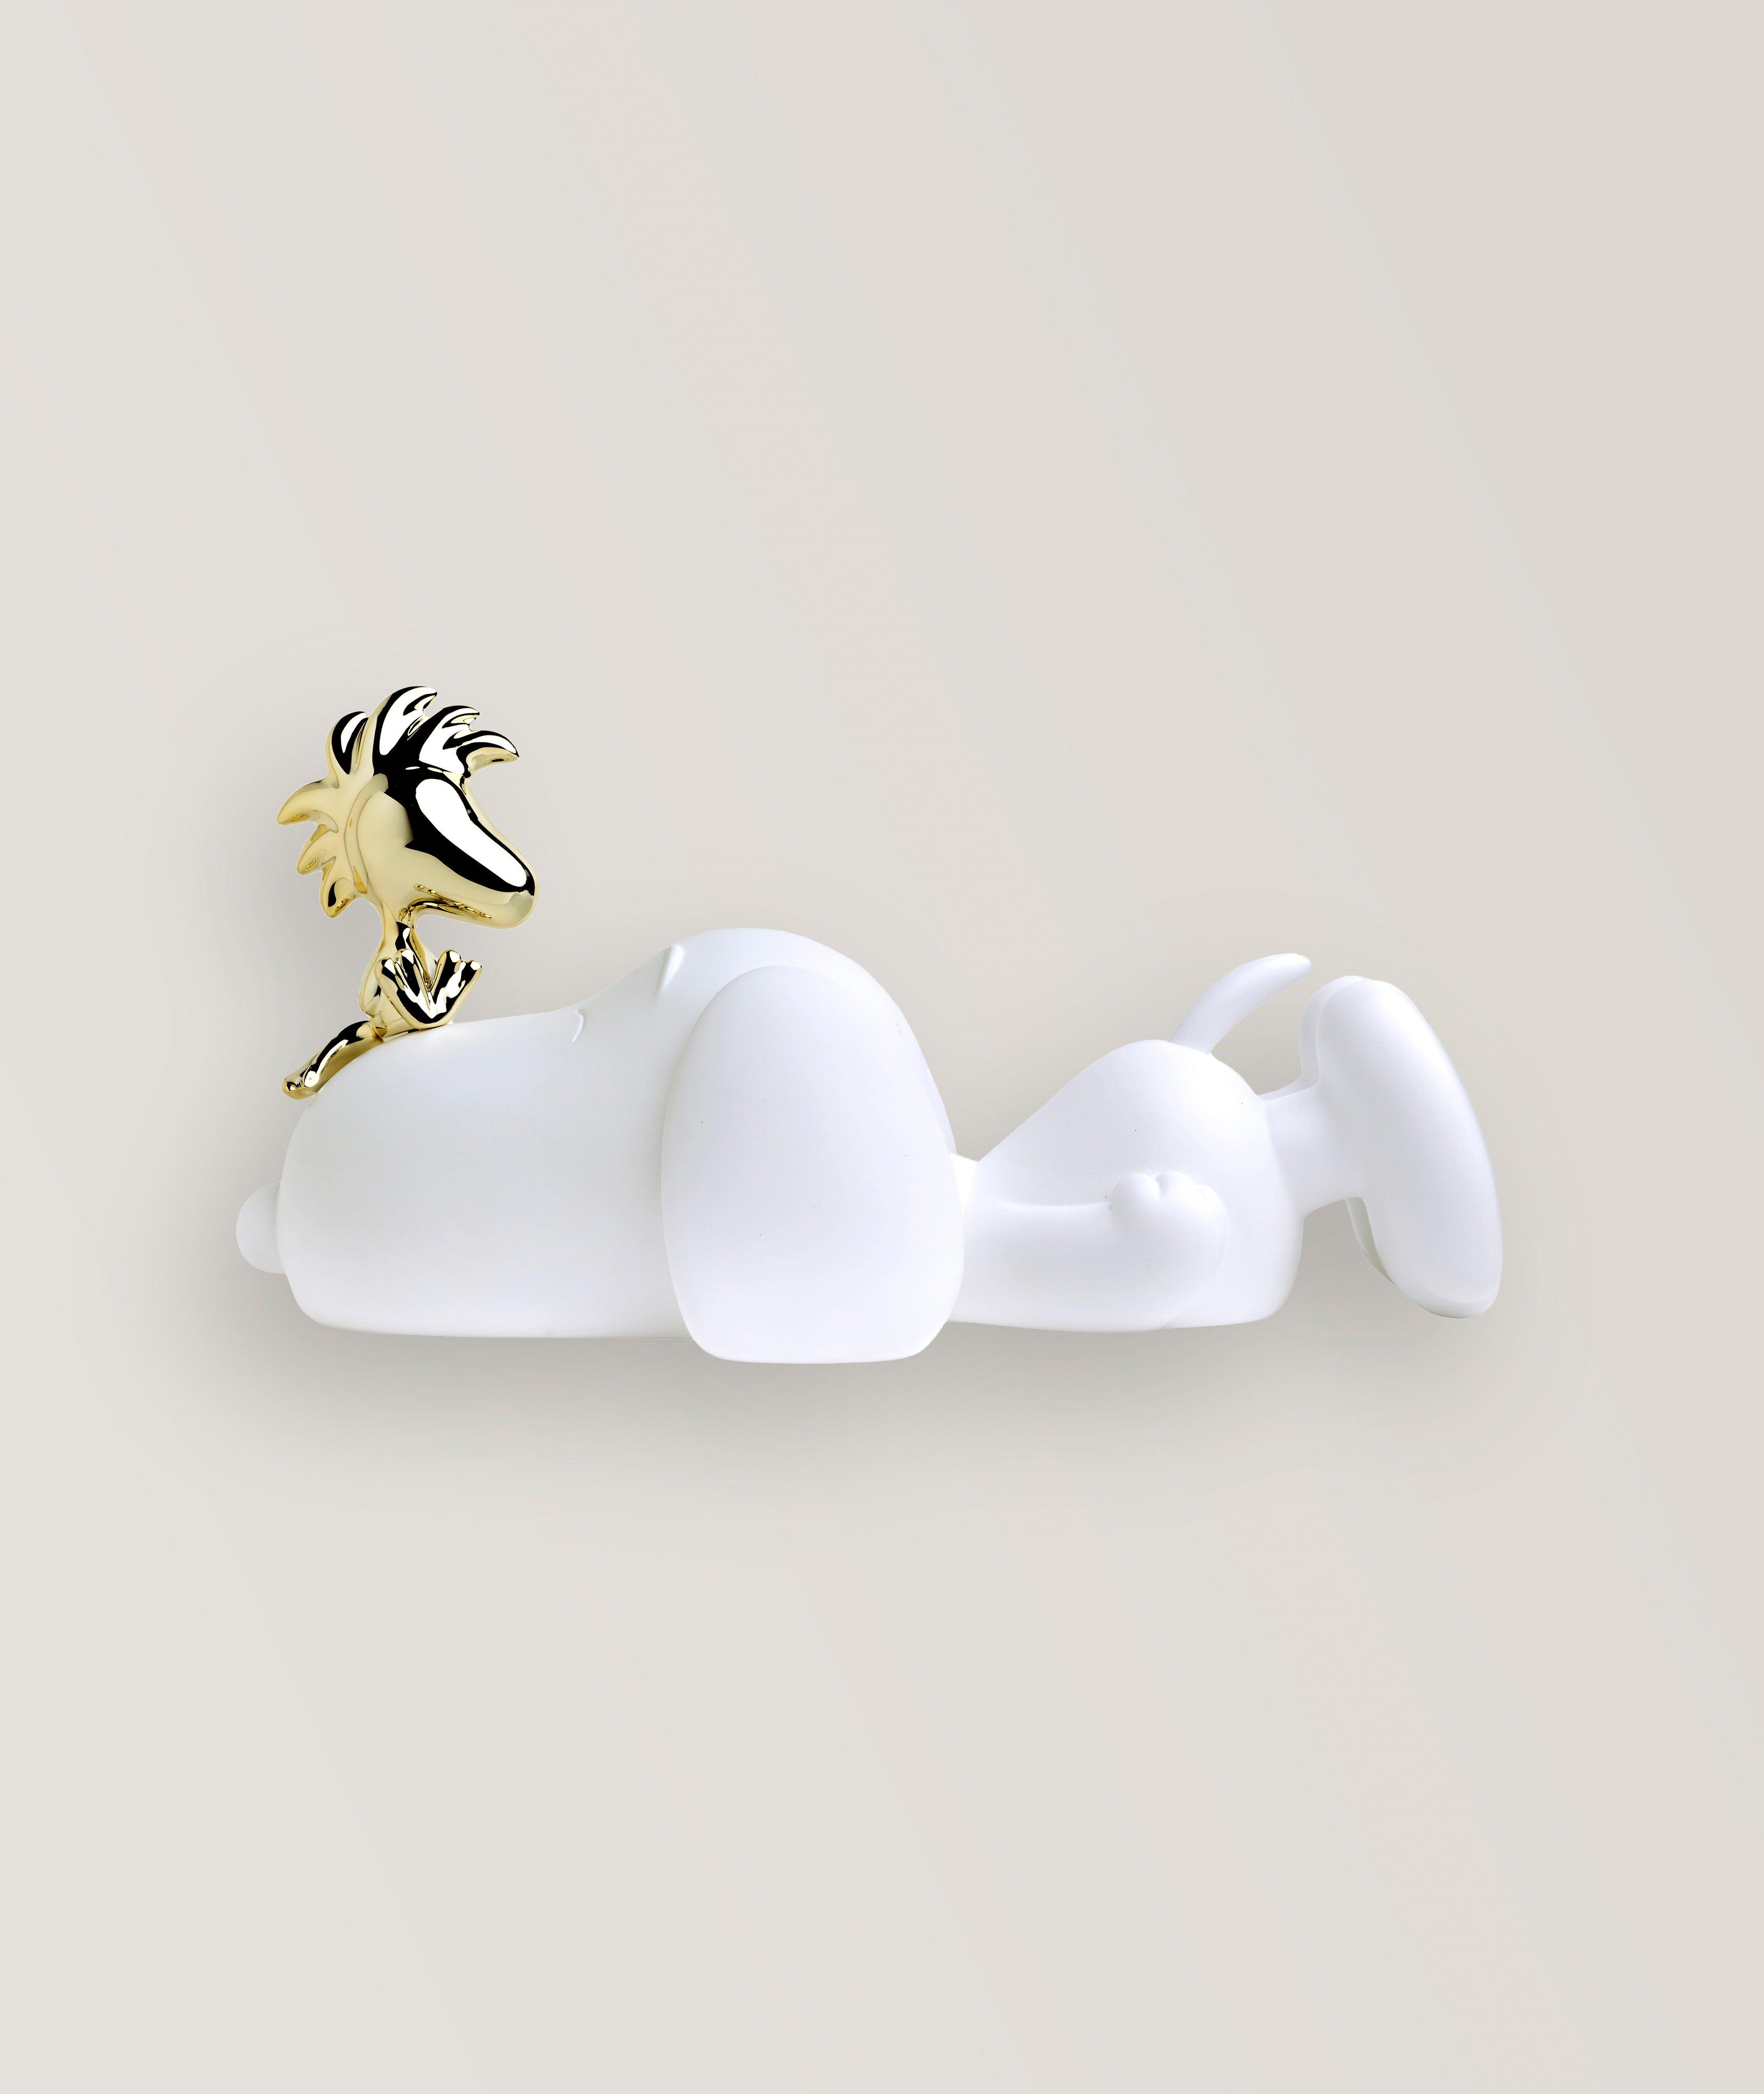 Peanuts Collection Snoopy & Woodstock Bicolour Resin Sculpture